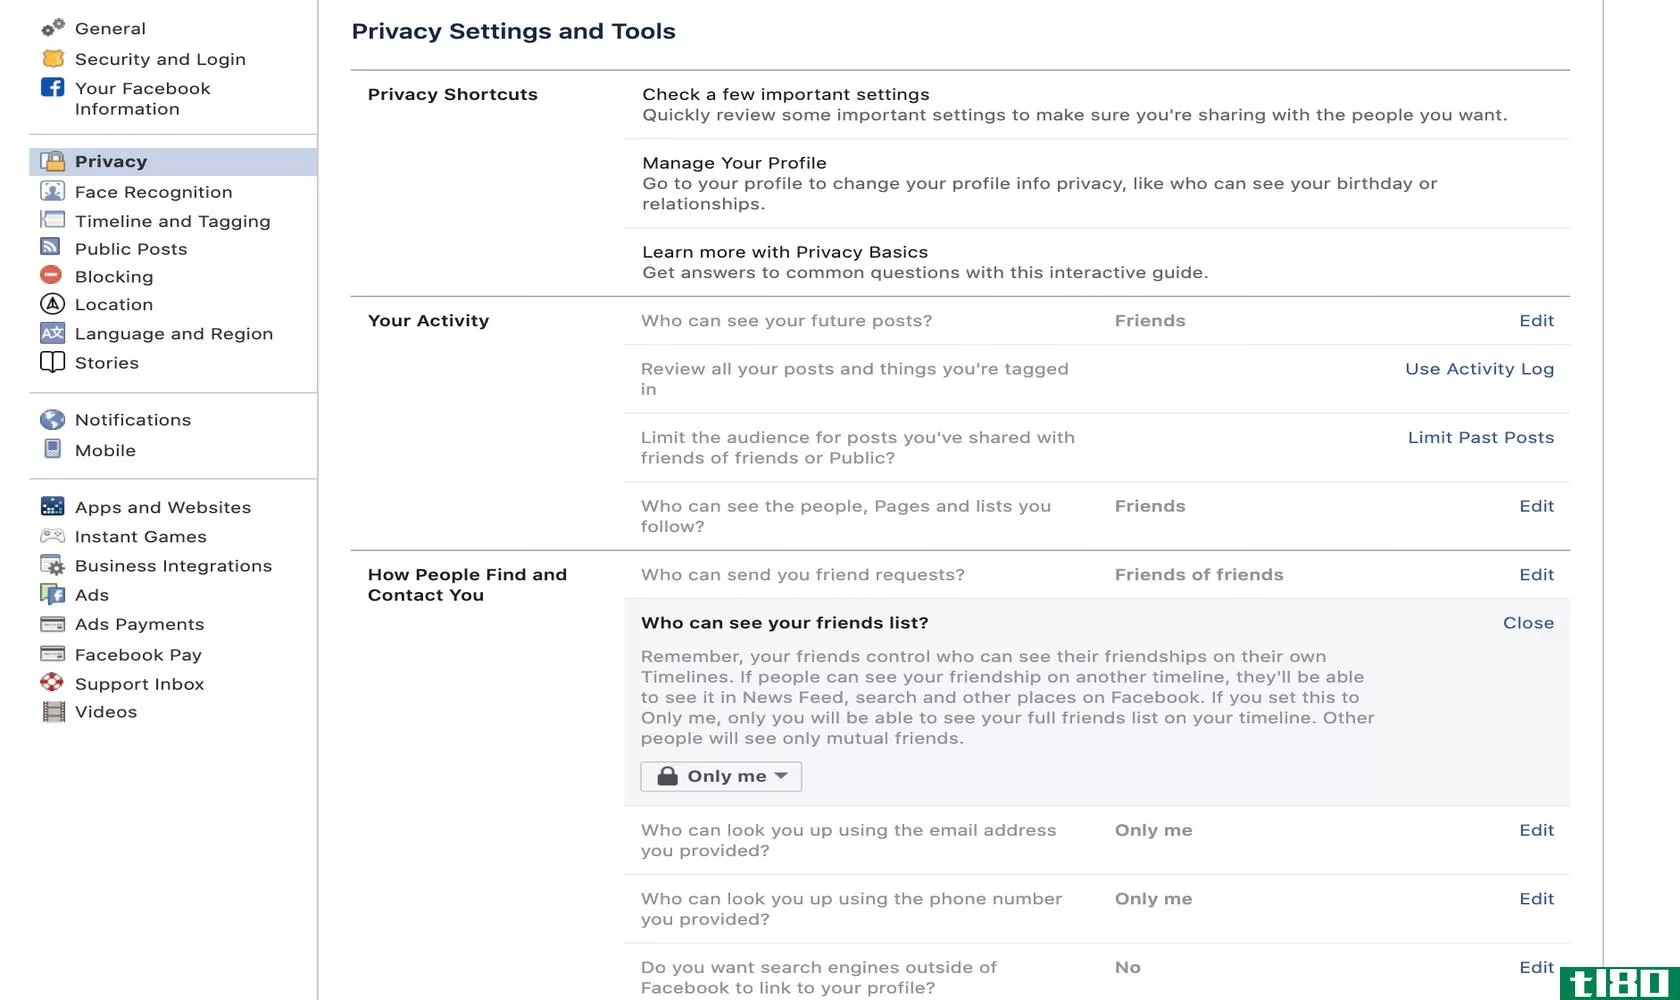 Screenshot of Facebook privacy settings page